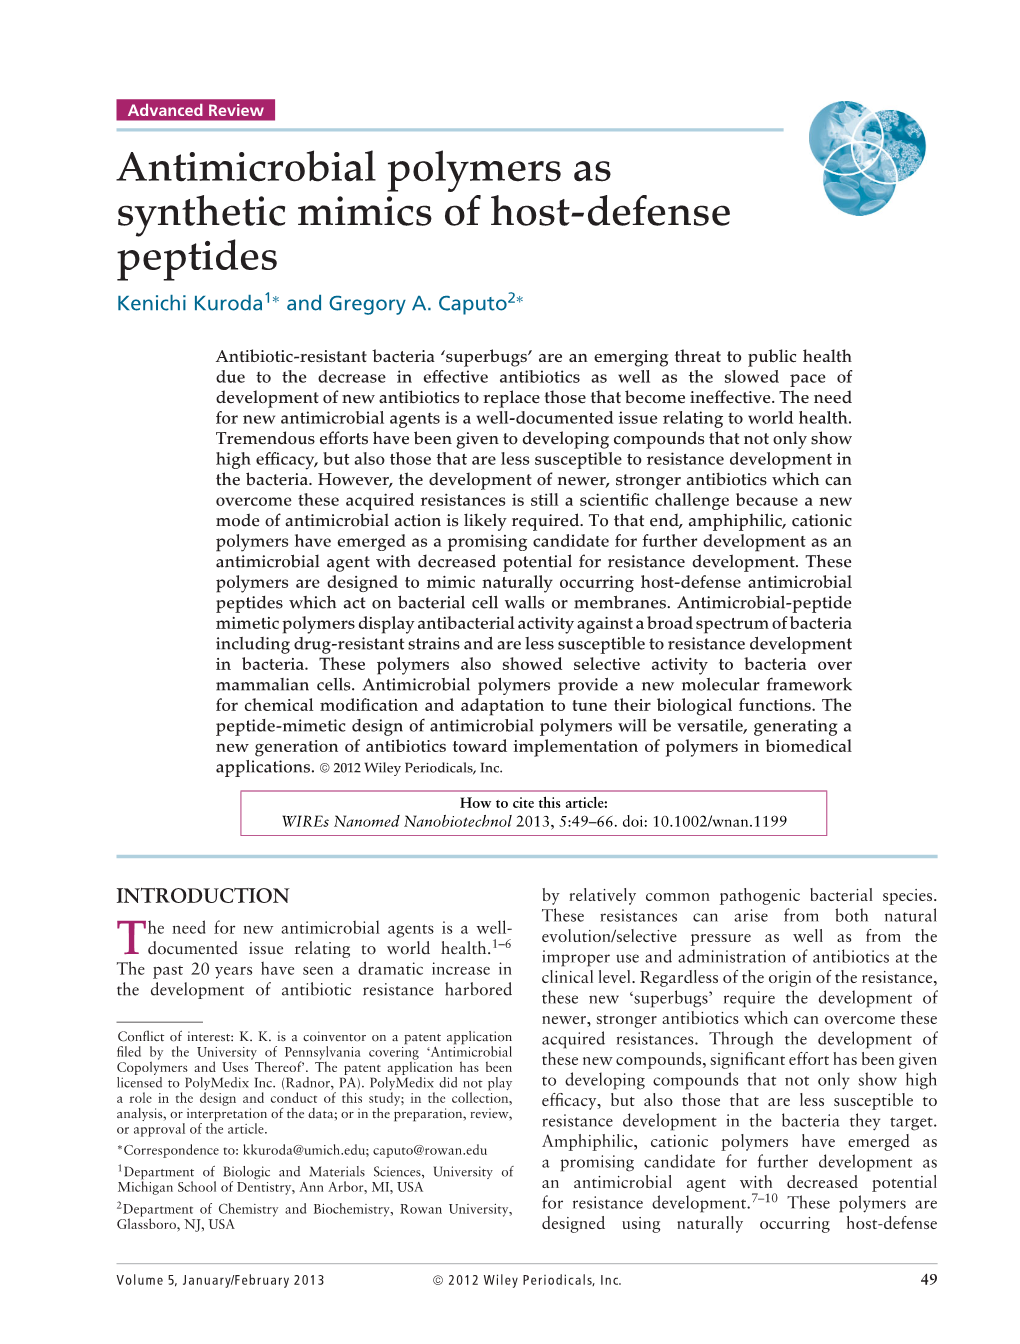 Antimicrobial Polymers As Synthetic Mimics of Hostdefense Peptides